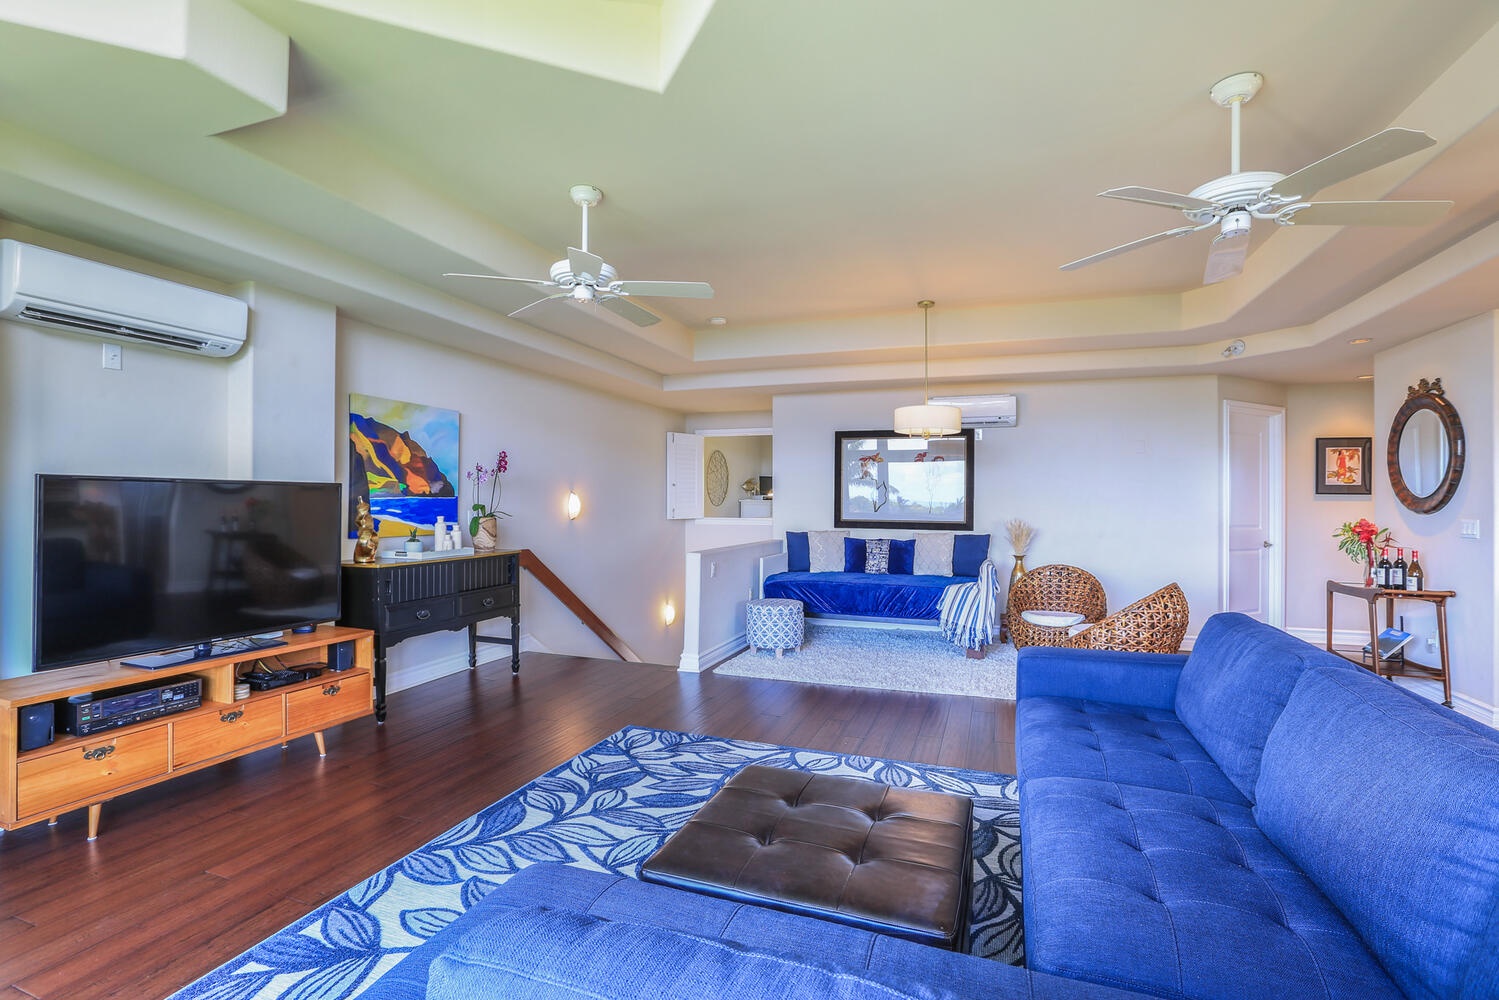 Princeville Vacation Rentals, Noelani Kai - Open floorplan concept with a sectional sofas.